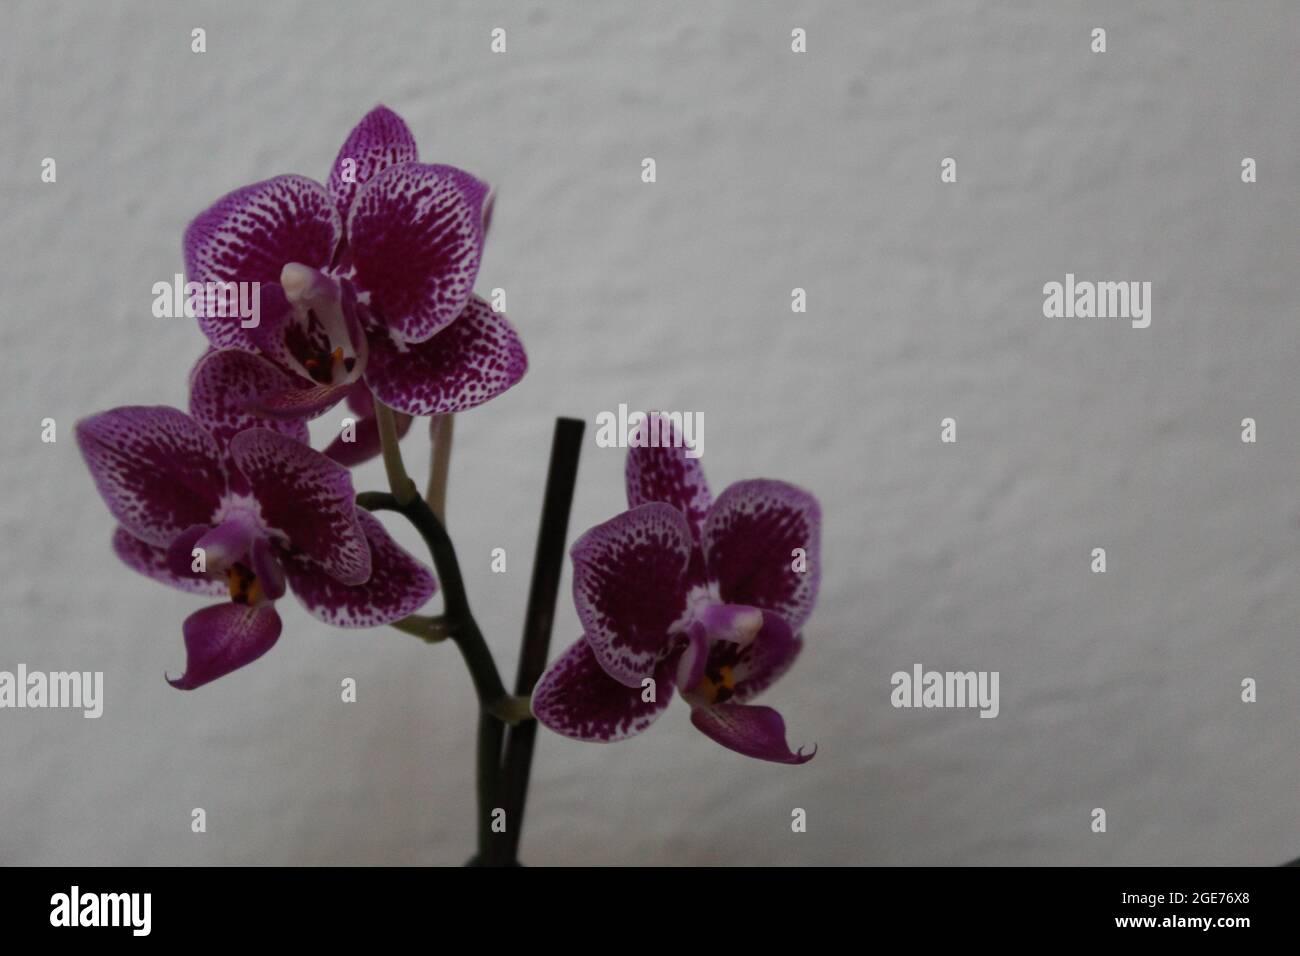 It's an orchid. Stock Photo